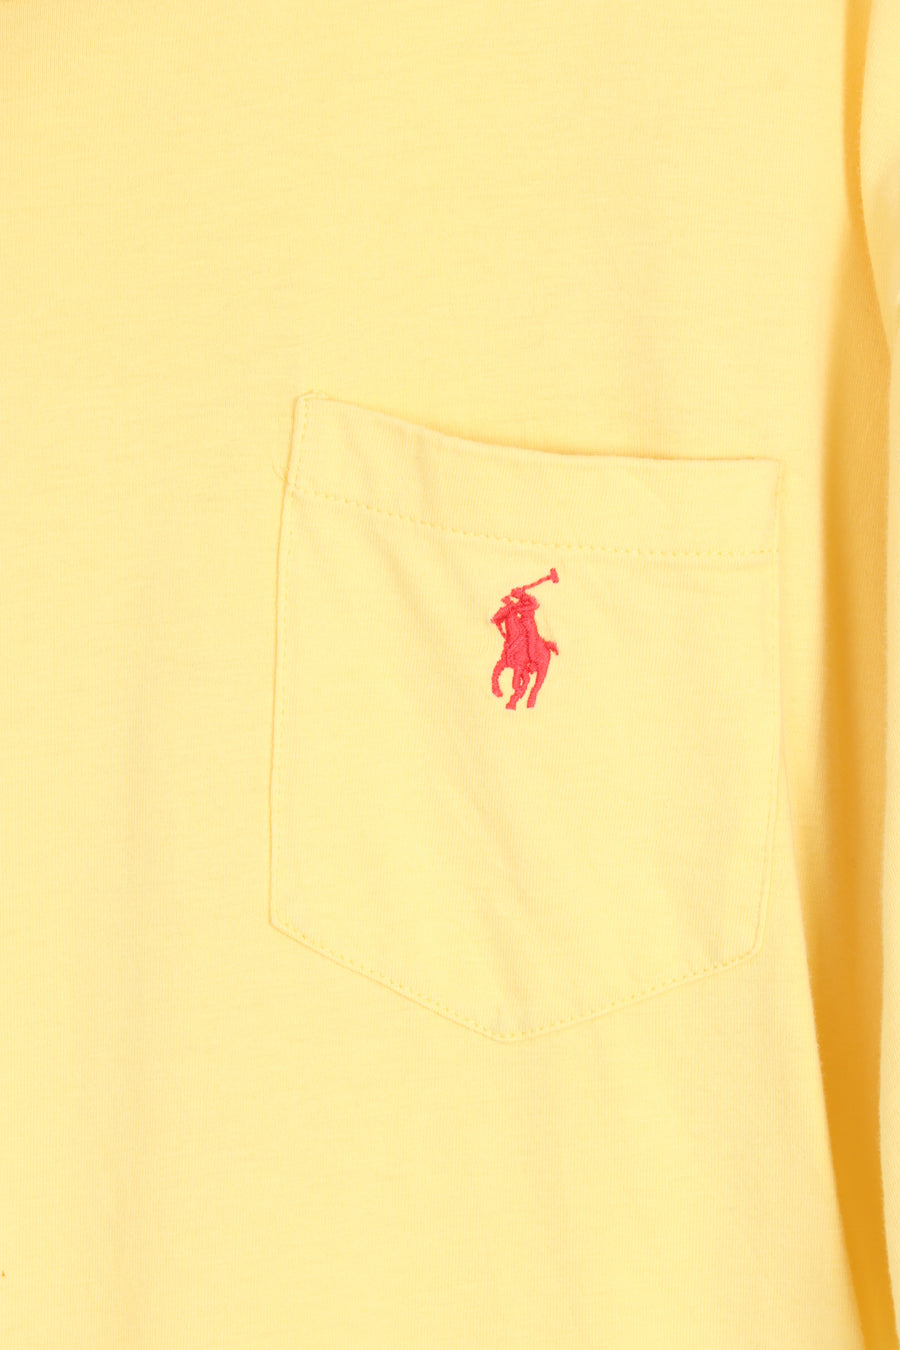 POLO RALPH LAUREN Yellow & Red Embroidered Single Stitch Pocket Tee (XL)